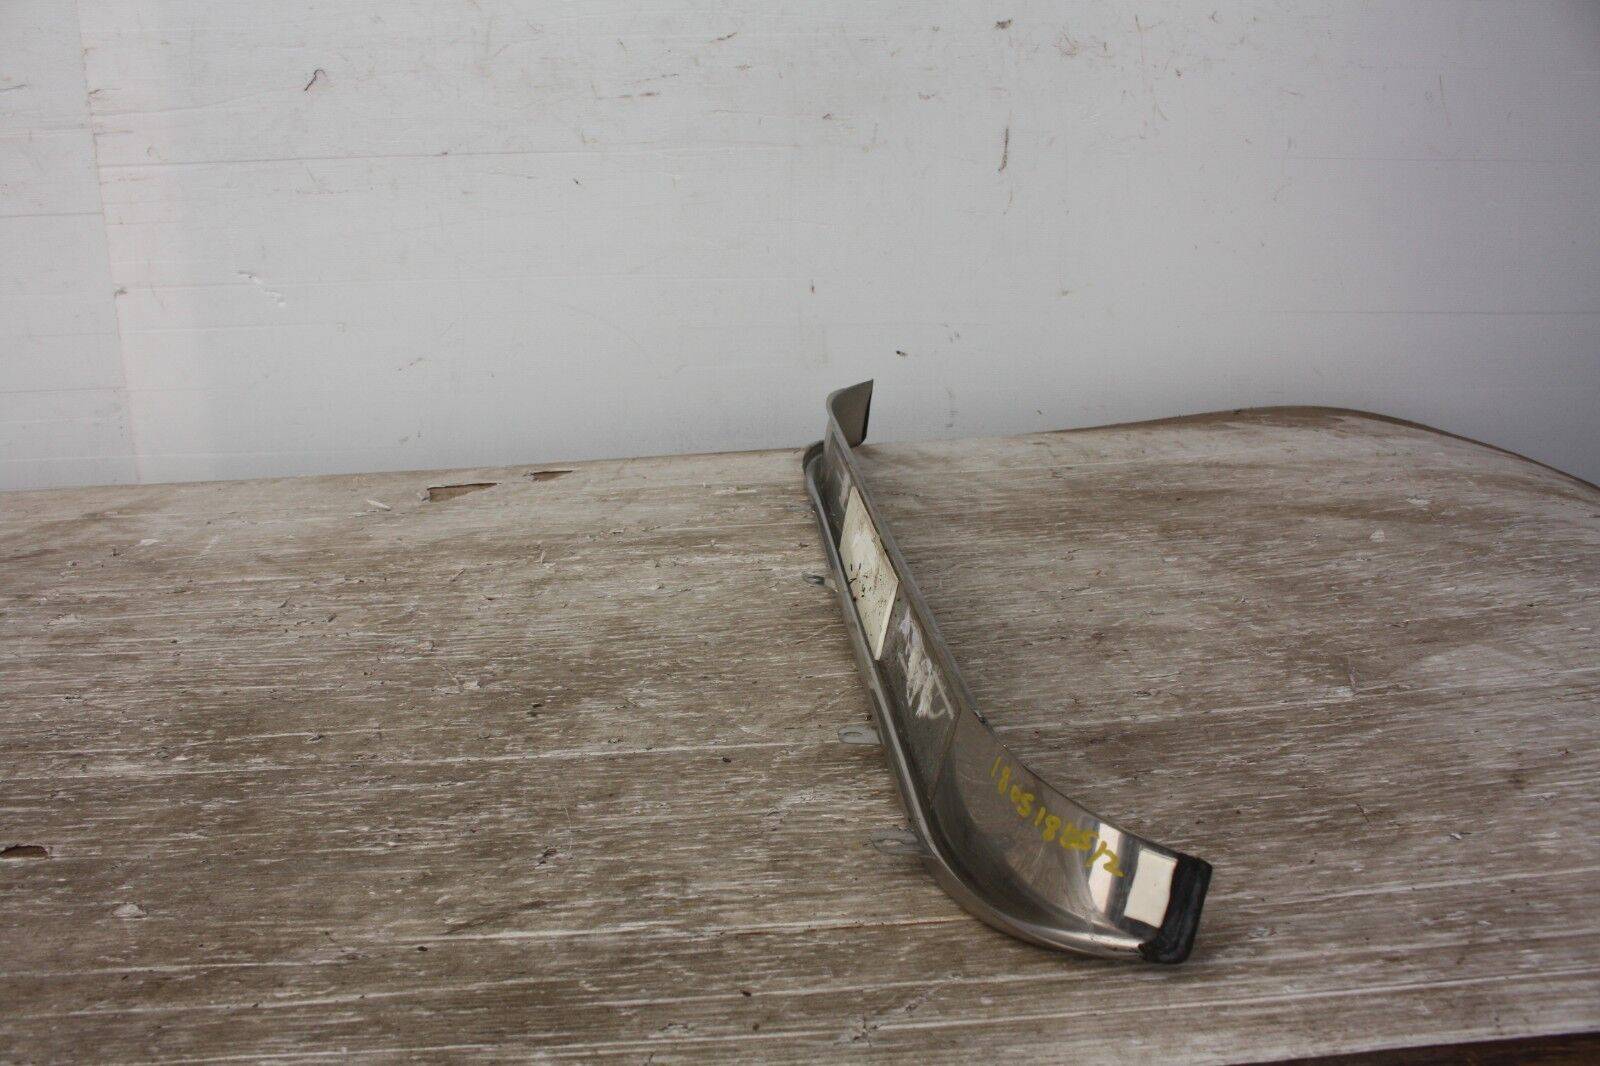 Bentley-Continental-Gt-V8S-Door-Entry-Sill-Step-Trim-2013-TO-2018-3W8853537AN-176469557421-9